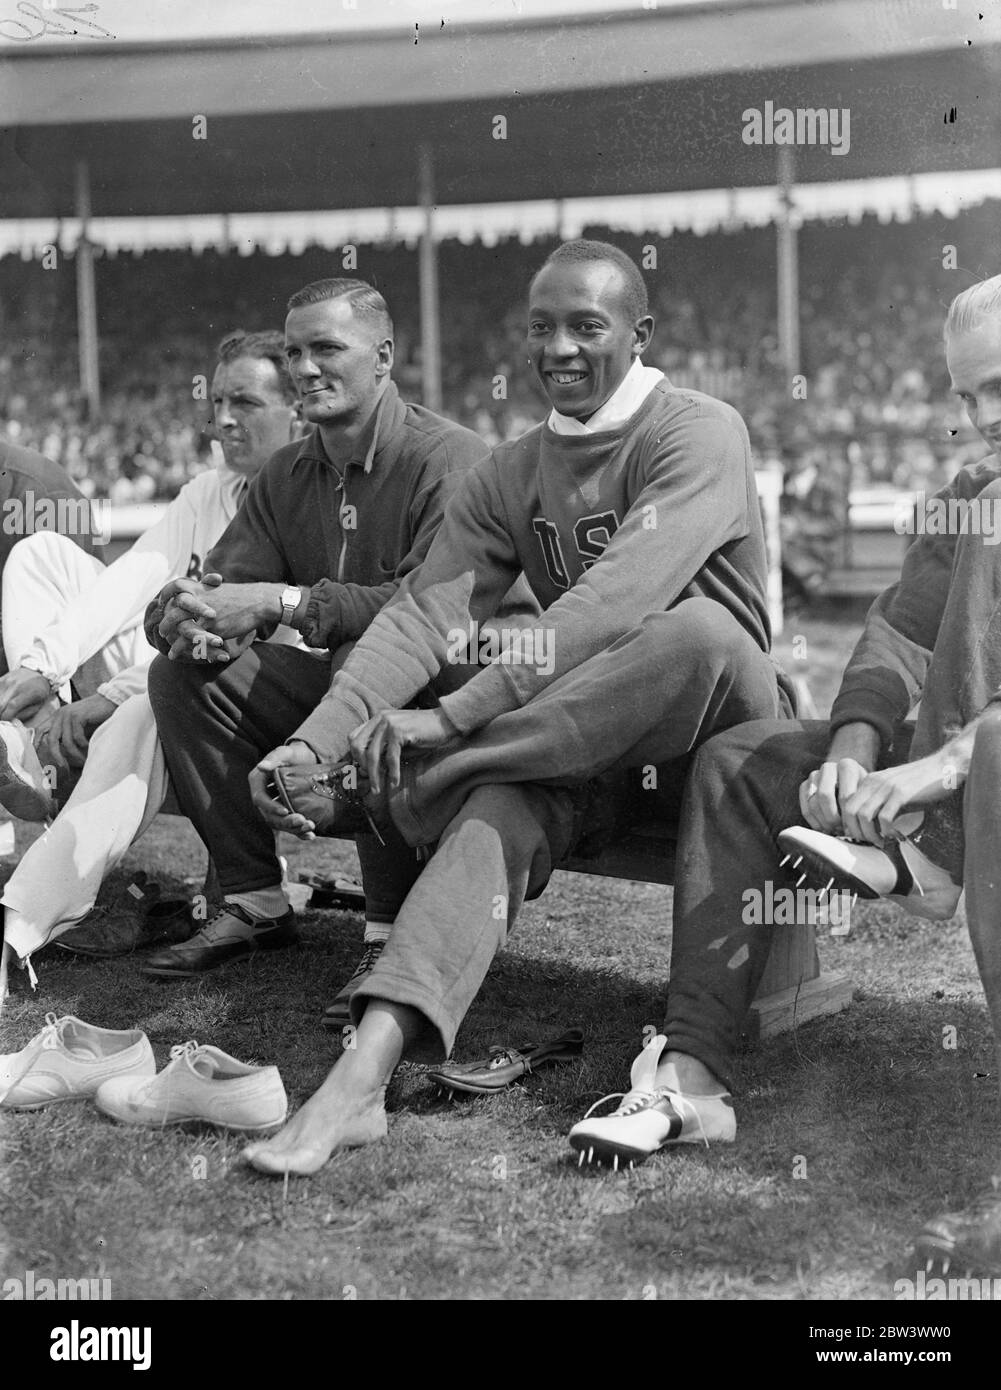 Jesse Owens , Olympic ' flyer ' , takes part in United States versus the Empire match at White City . The Olympic record-breaking athletes of the United States , including Jesse Owens , winner of the three Olympic gold medals , opposed athletes of the British Empire in a meeting at the White City , London . The contest was a series of relay and team races , with six field events . Photo shows , Jesse Owens ( USA ) that Iran is running shoes at the White City . 15 August 1936 Stock Photo